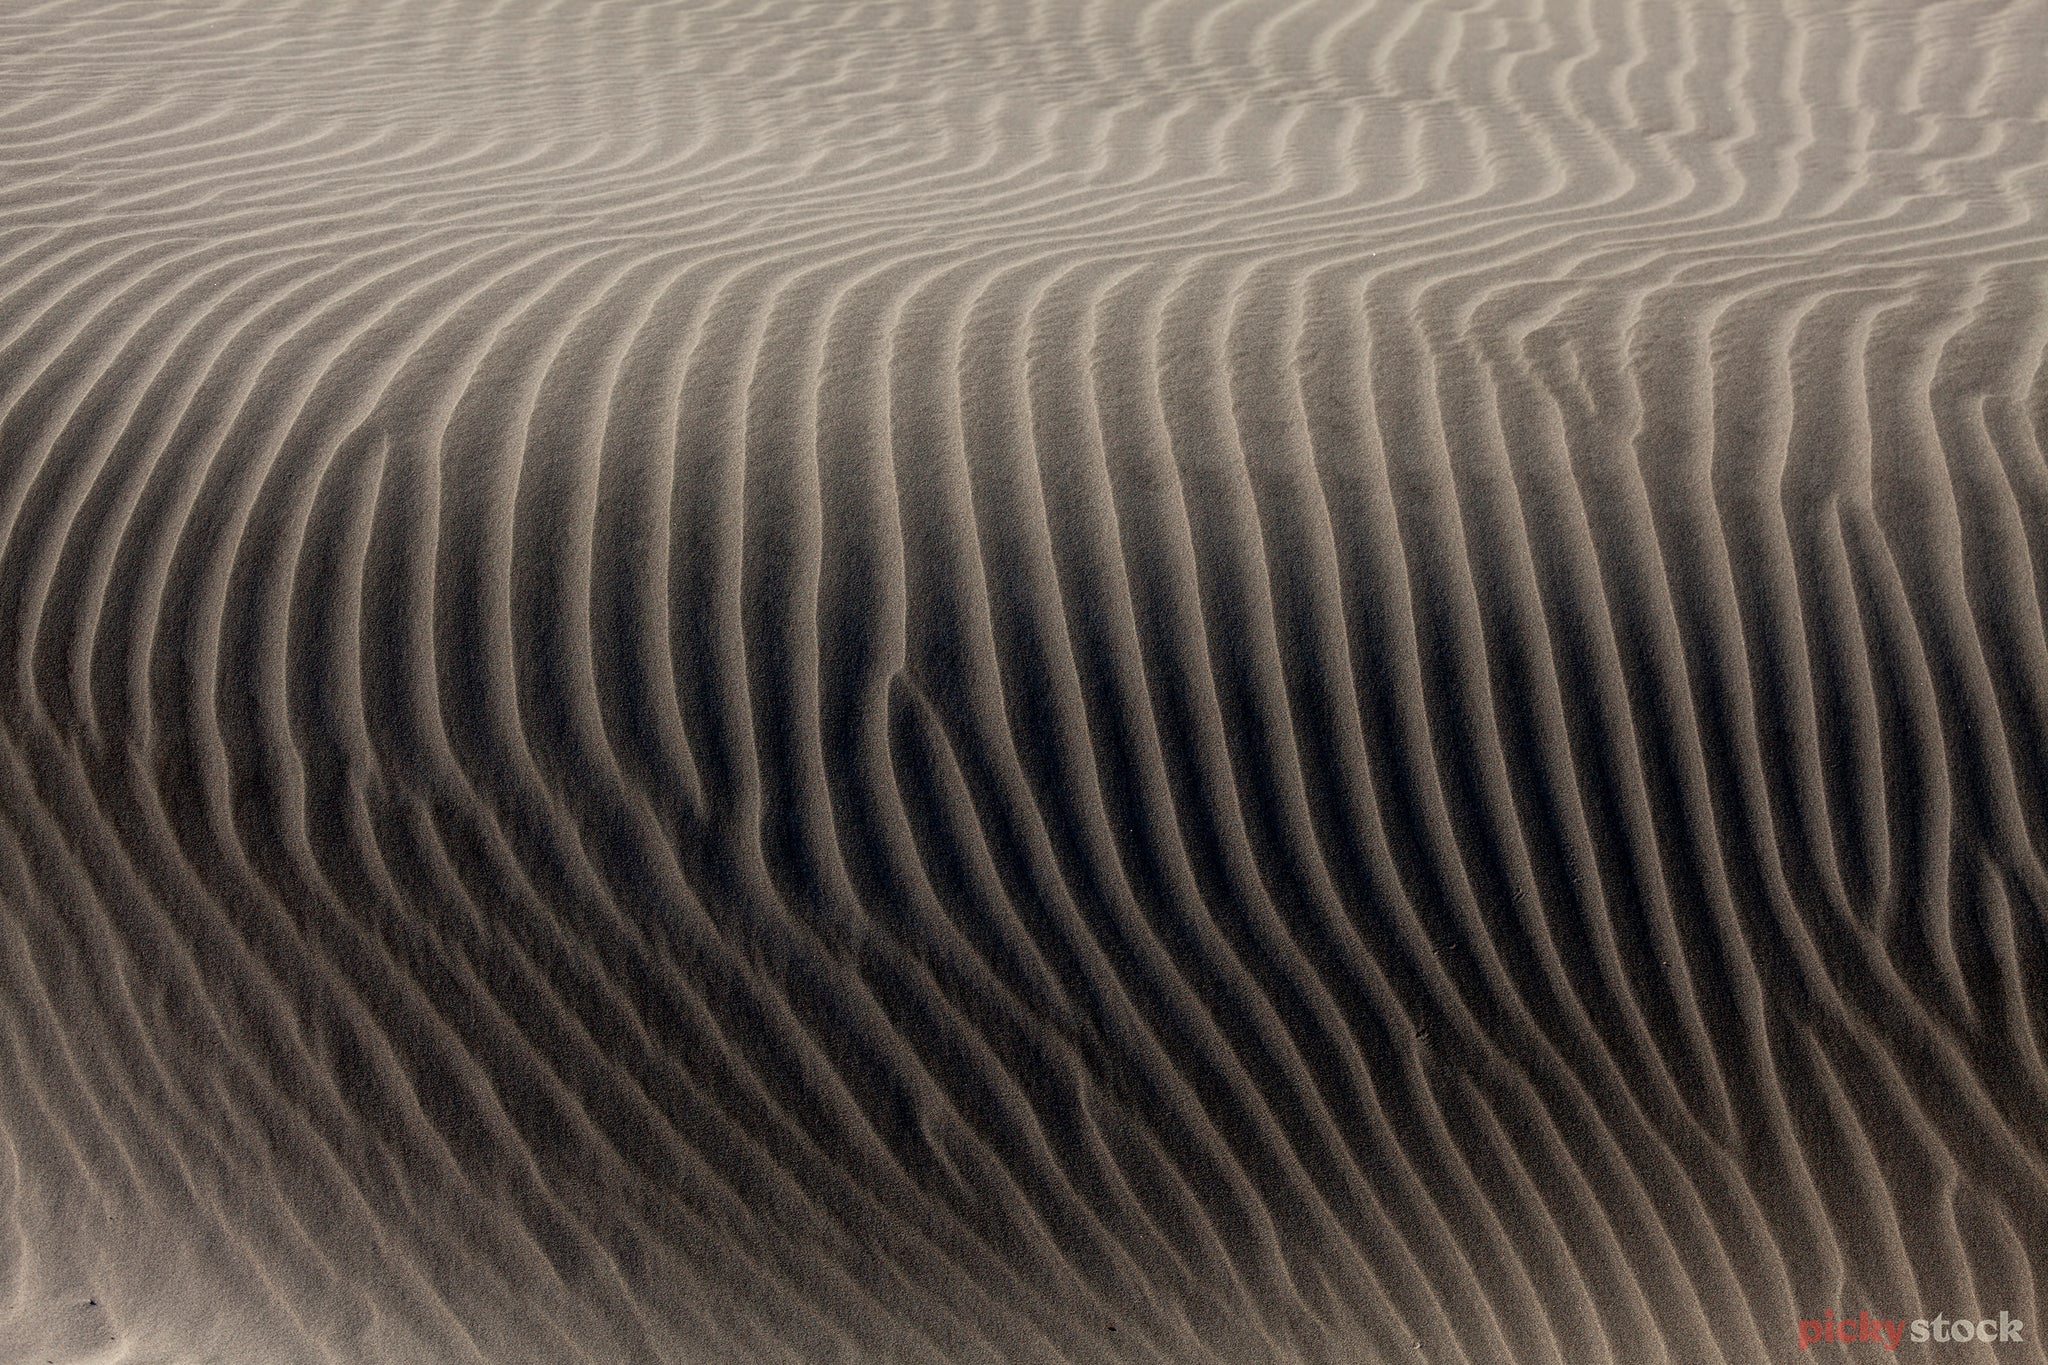 Close up angle shot of a sand dune and epic natural patterns.